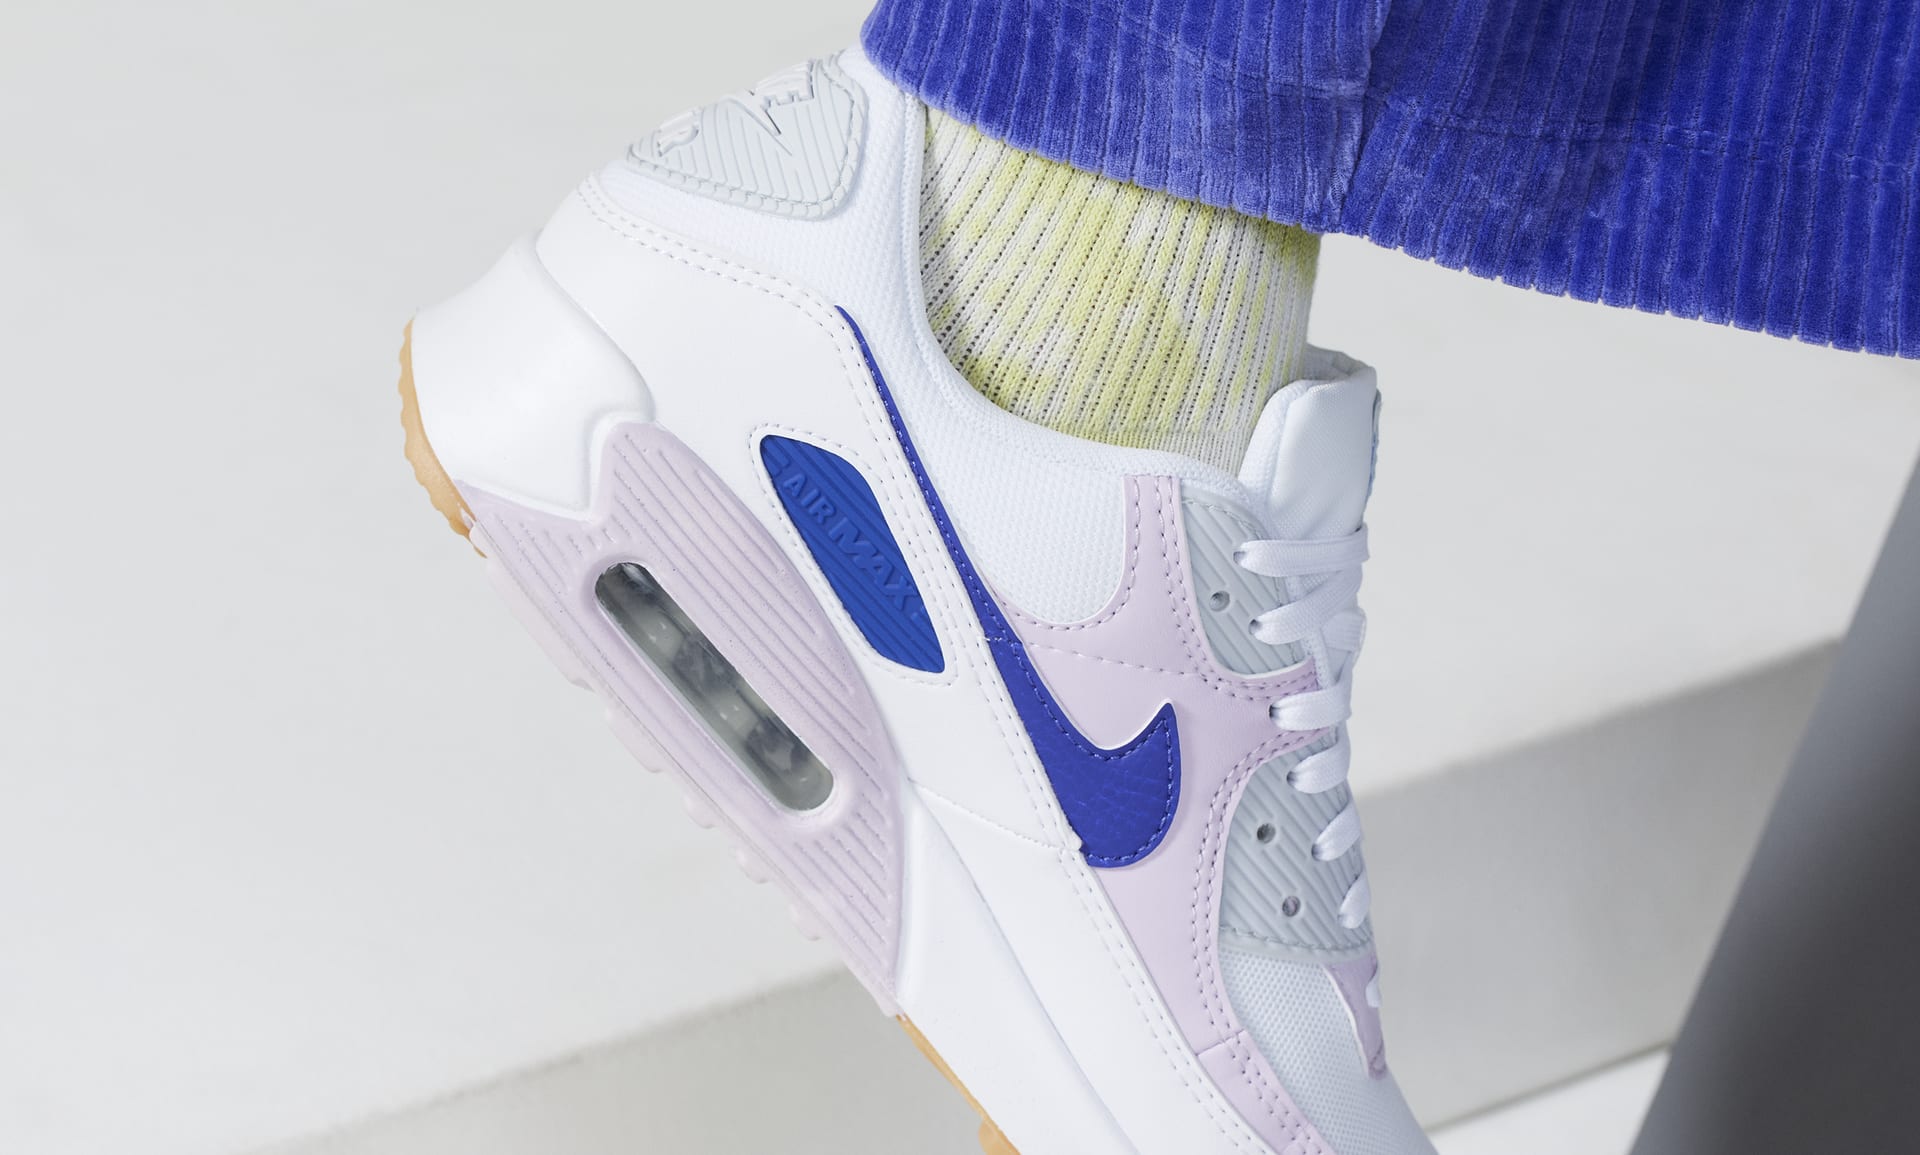 Nike Air Max 90 By You Custom Women's Shoes.